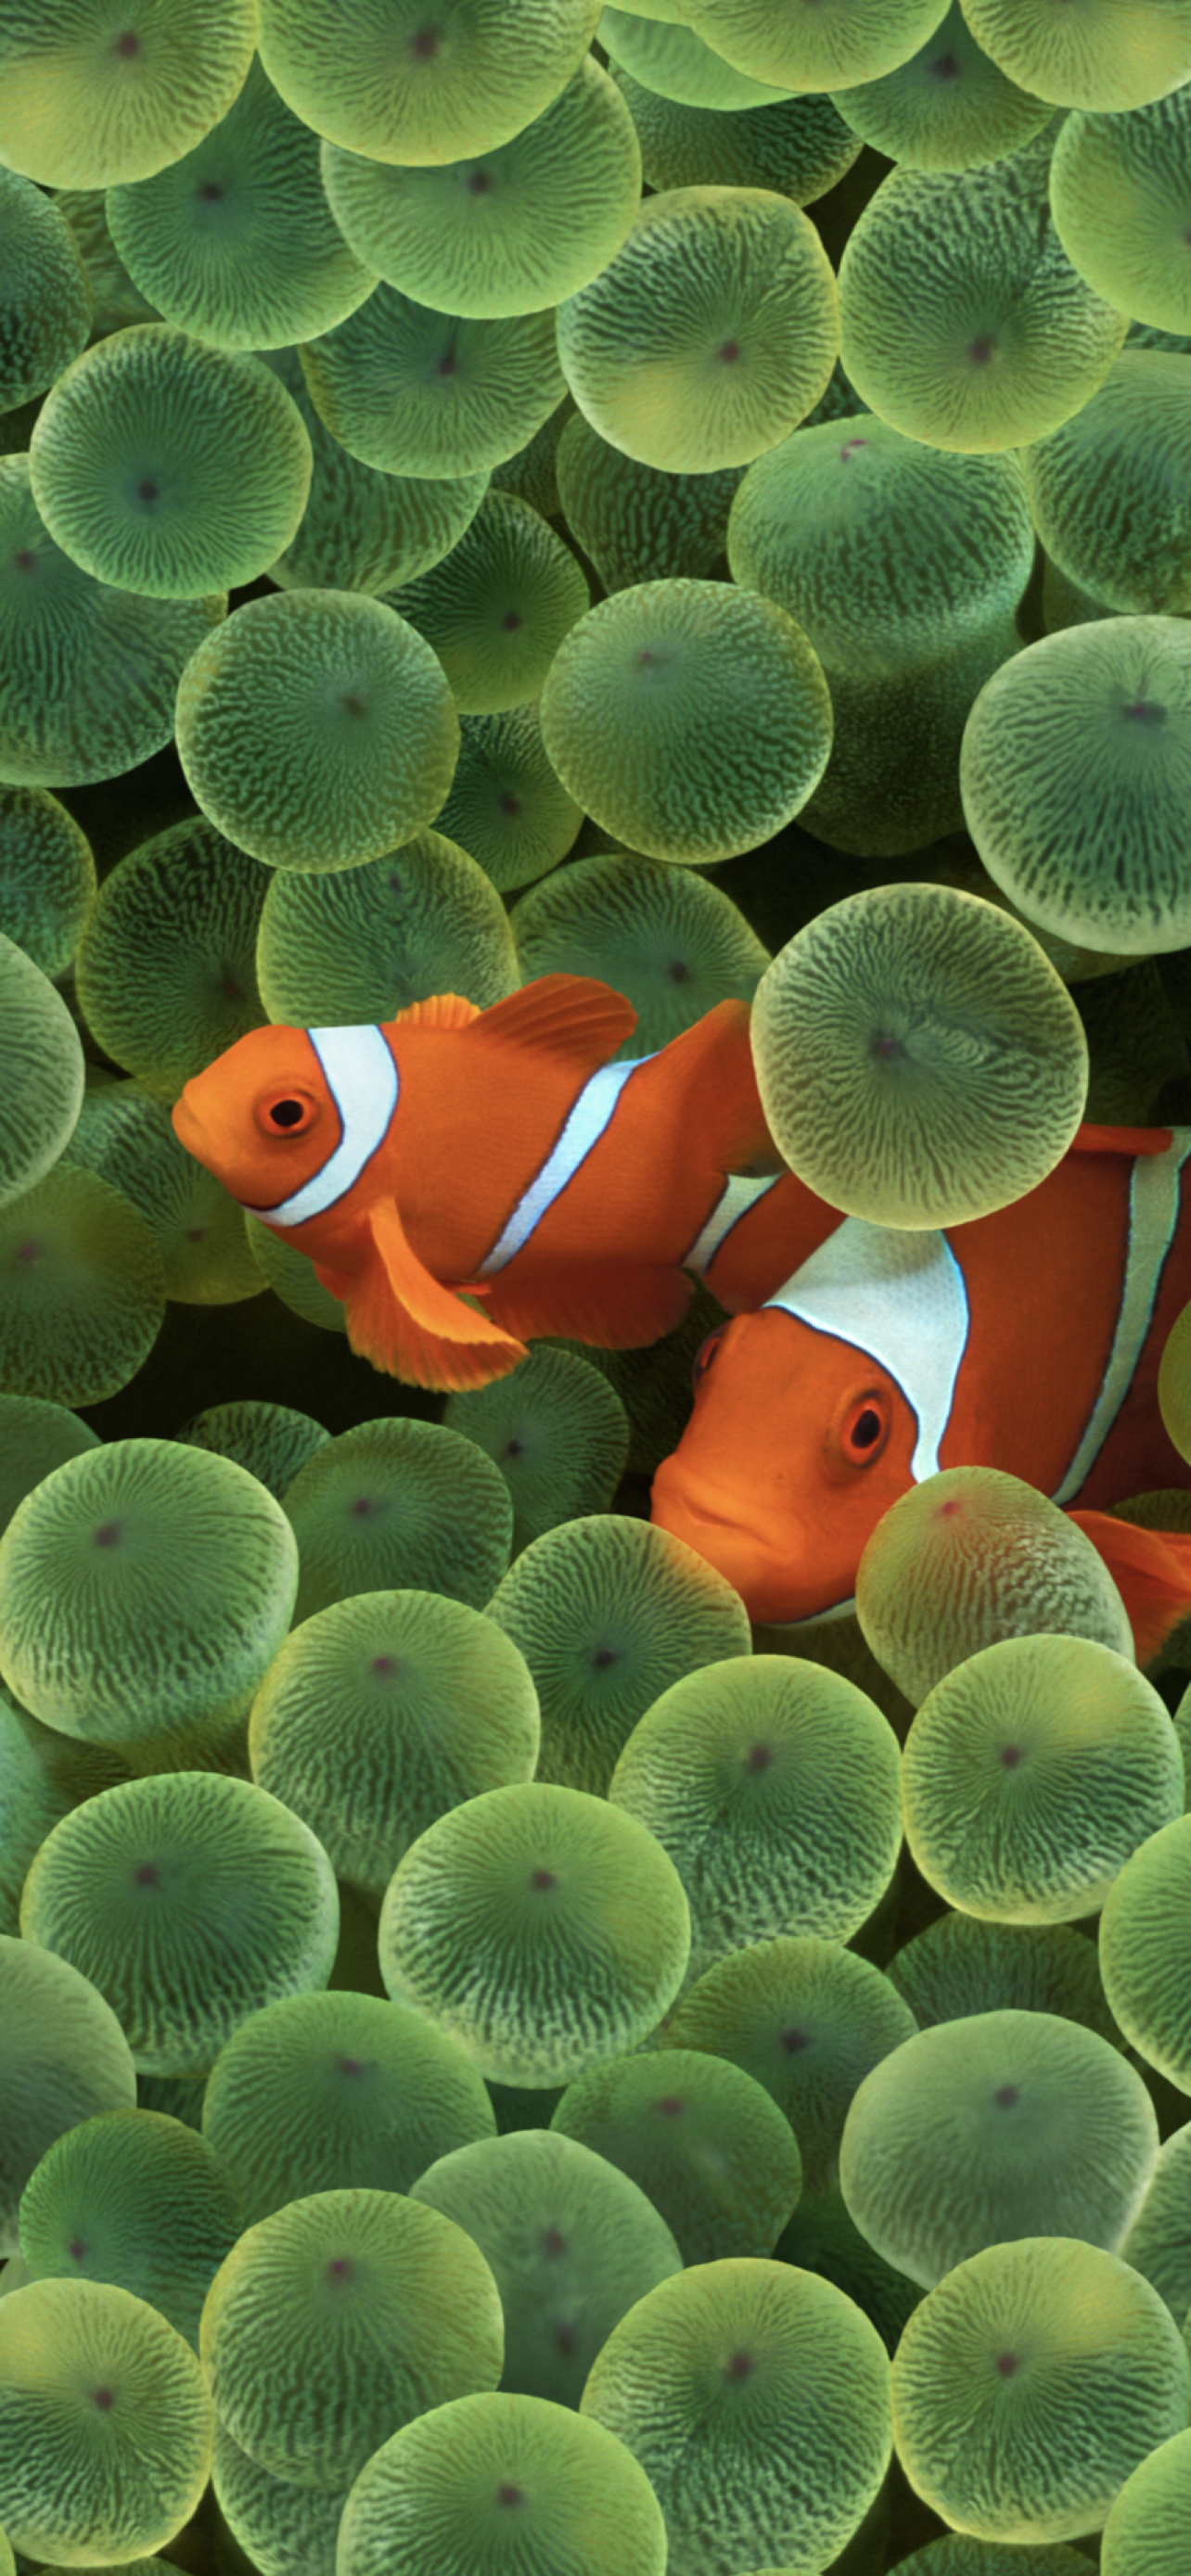 iOS includes clownfish wallpaper from original iPhone 9to5Mac